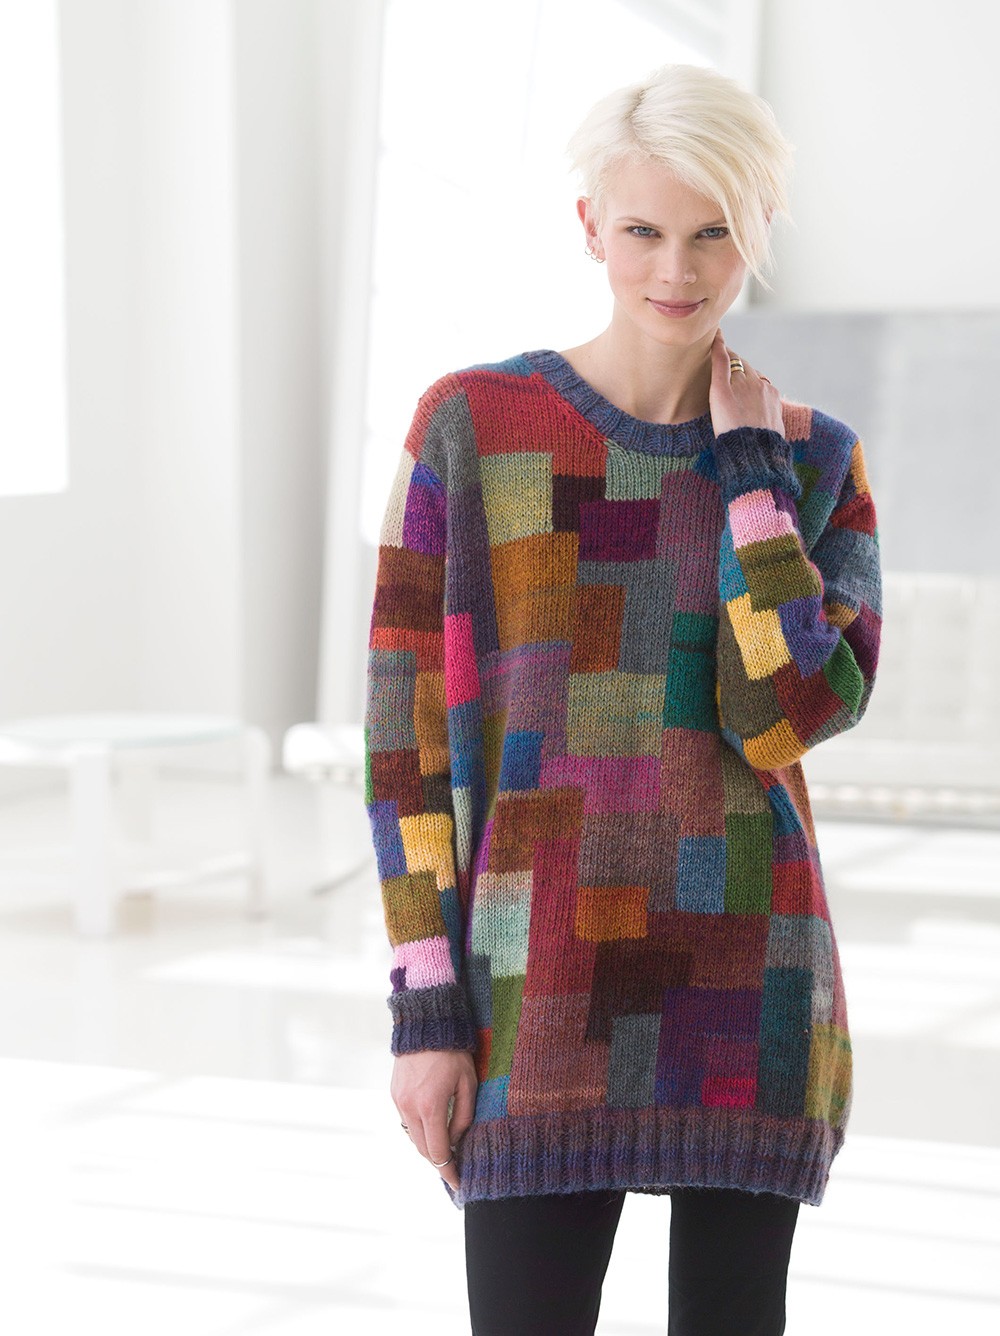 Free knitting pattern for a modern color block sweater dress ⋆ Knitting Bee